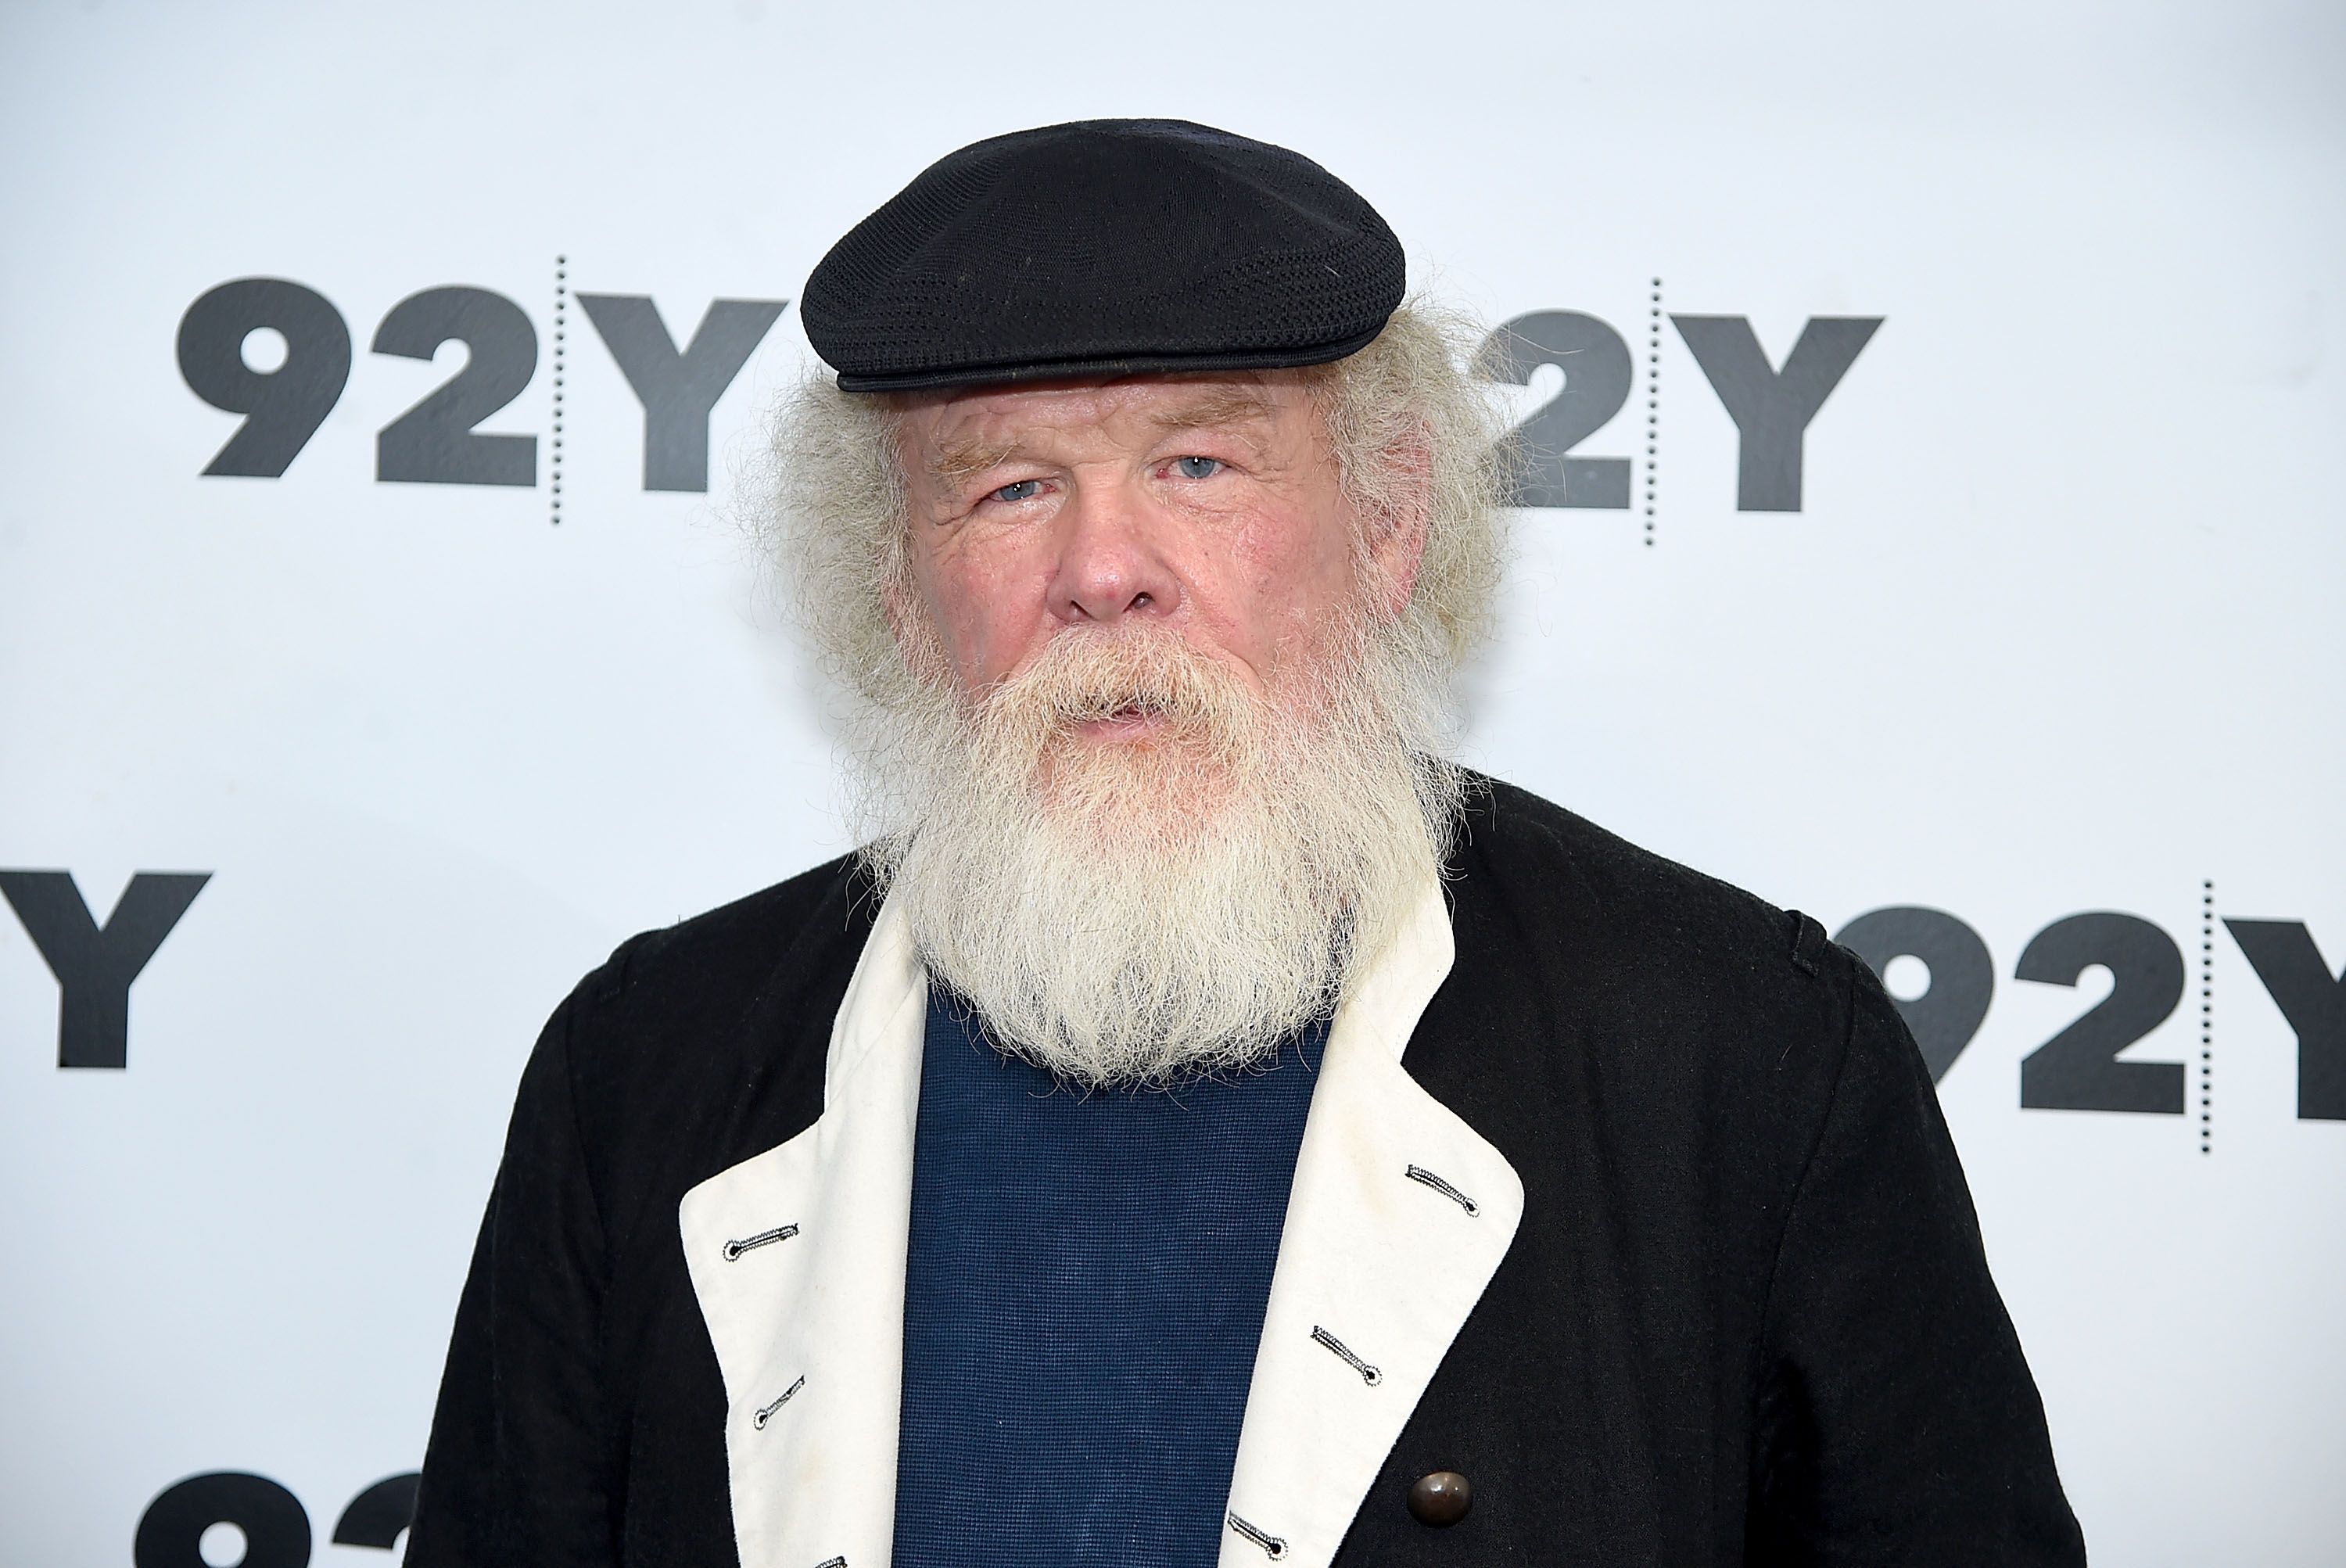 Nick Nolte at the presentation of "Reel Pieces" celebrating the career of Nick Nolte in 2018 in New York City | Source: Getty Images